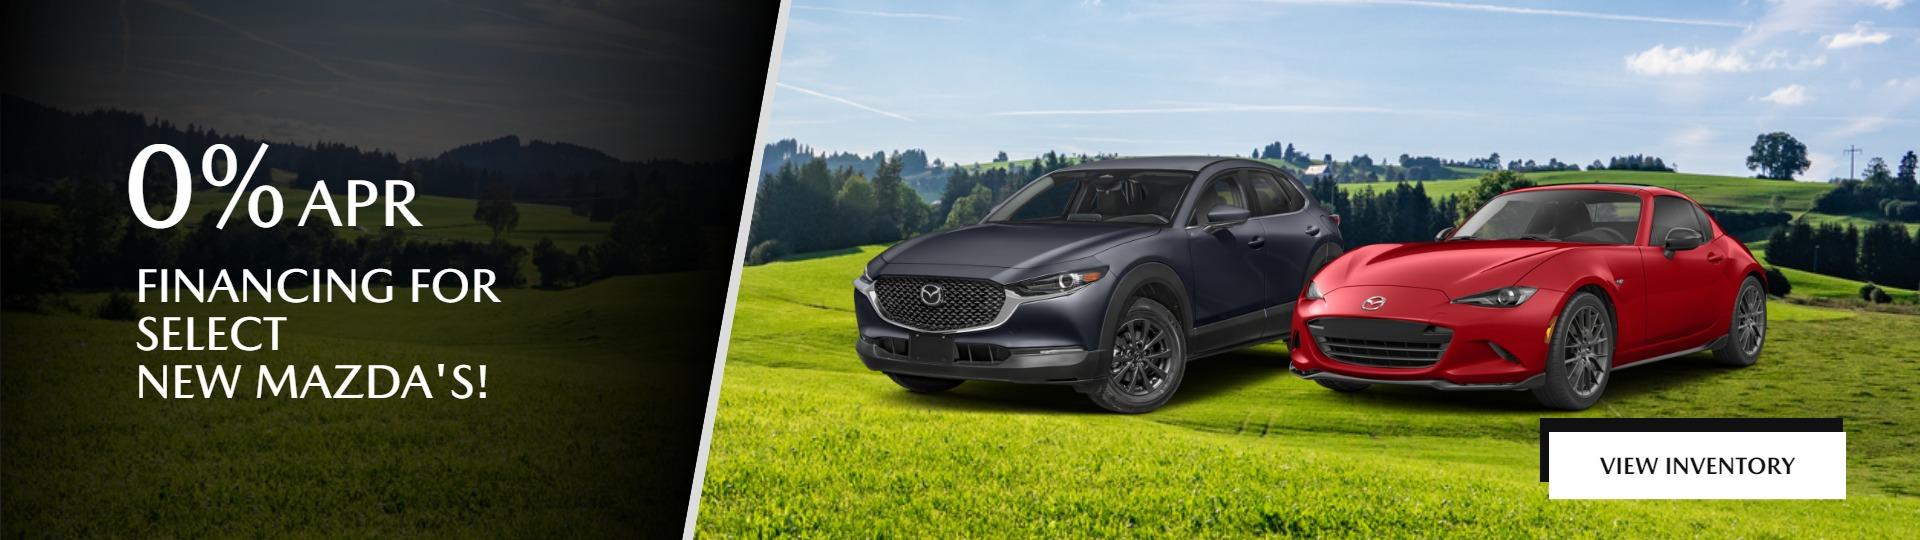 0% APR
FINANCING
FOR
SELECT NEW MAZDA'S!